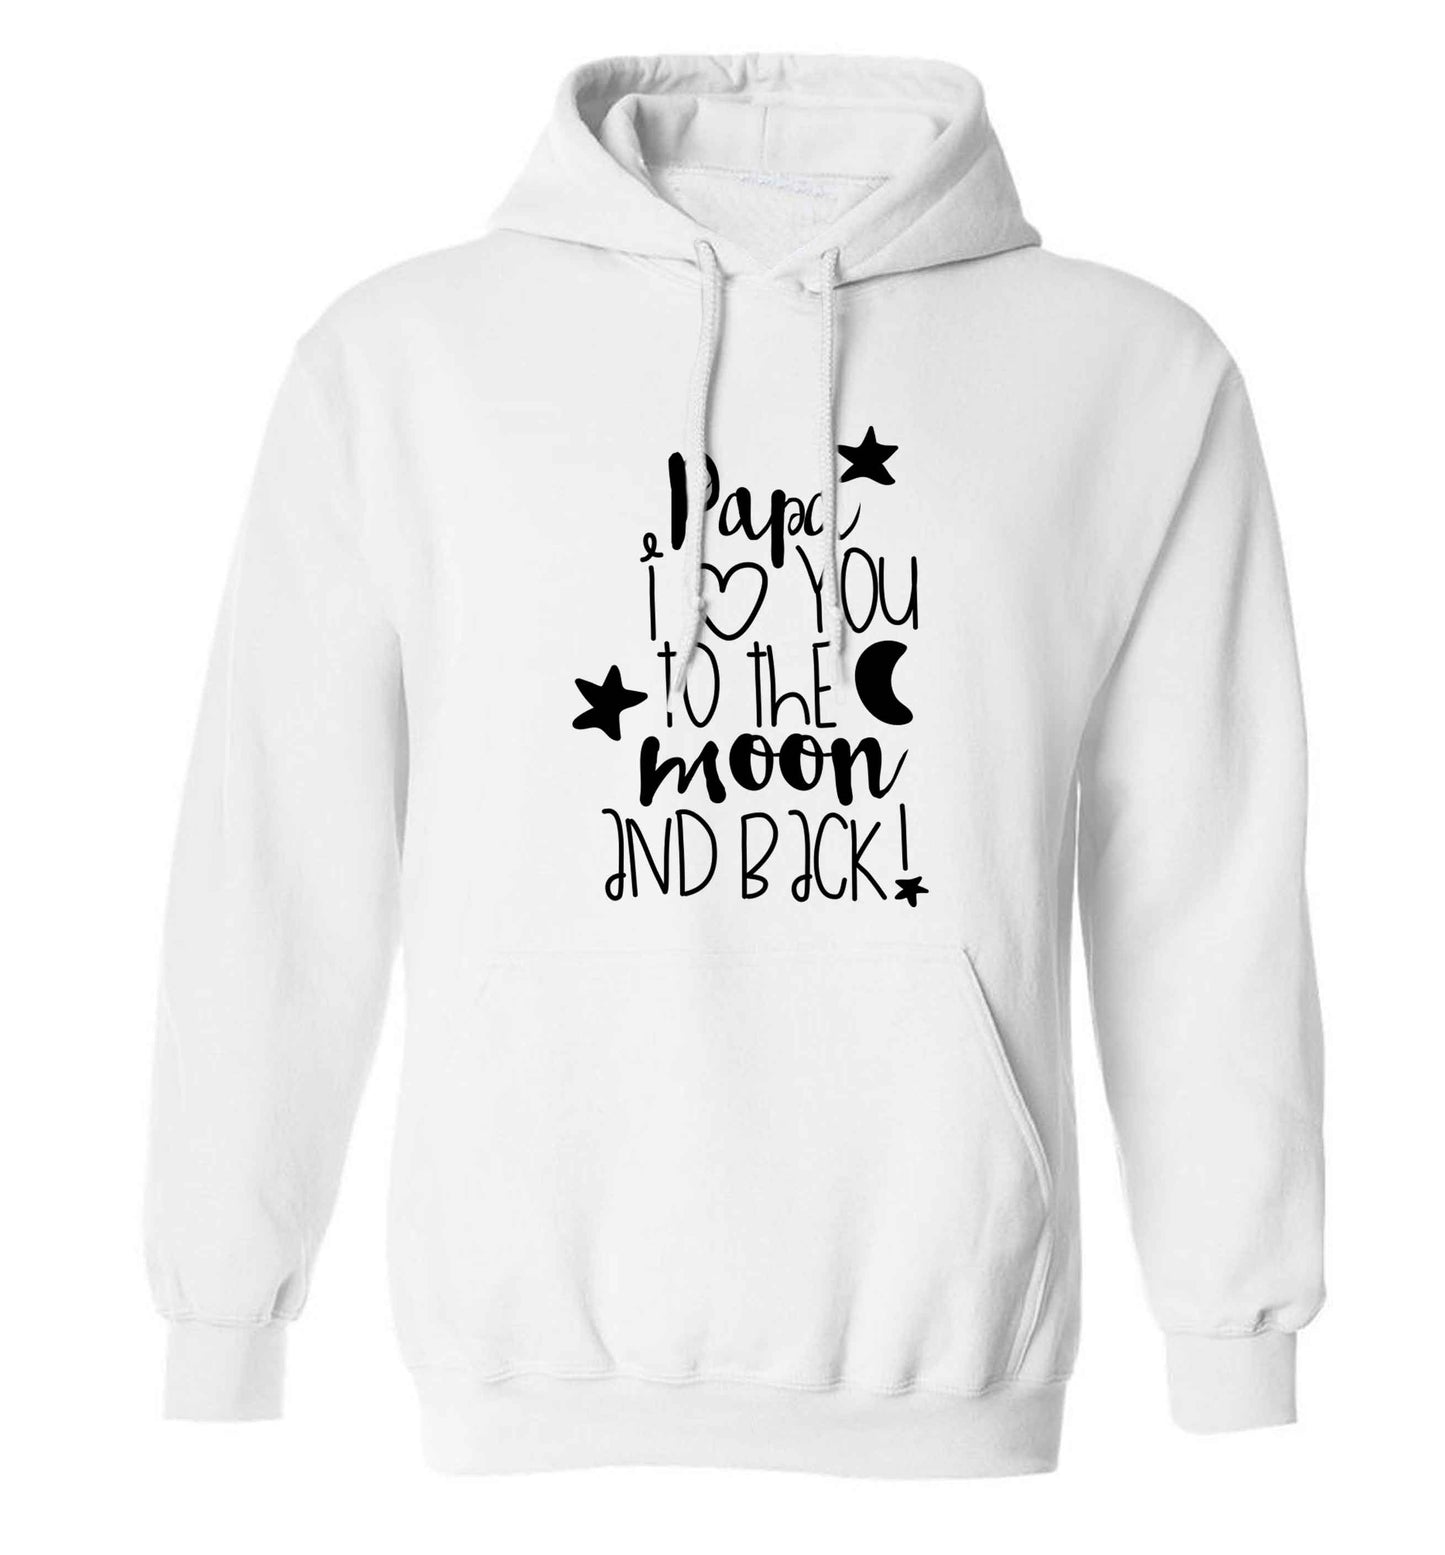 Papa I love you to the moon and back adults unisex white hoodie 2XL